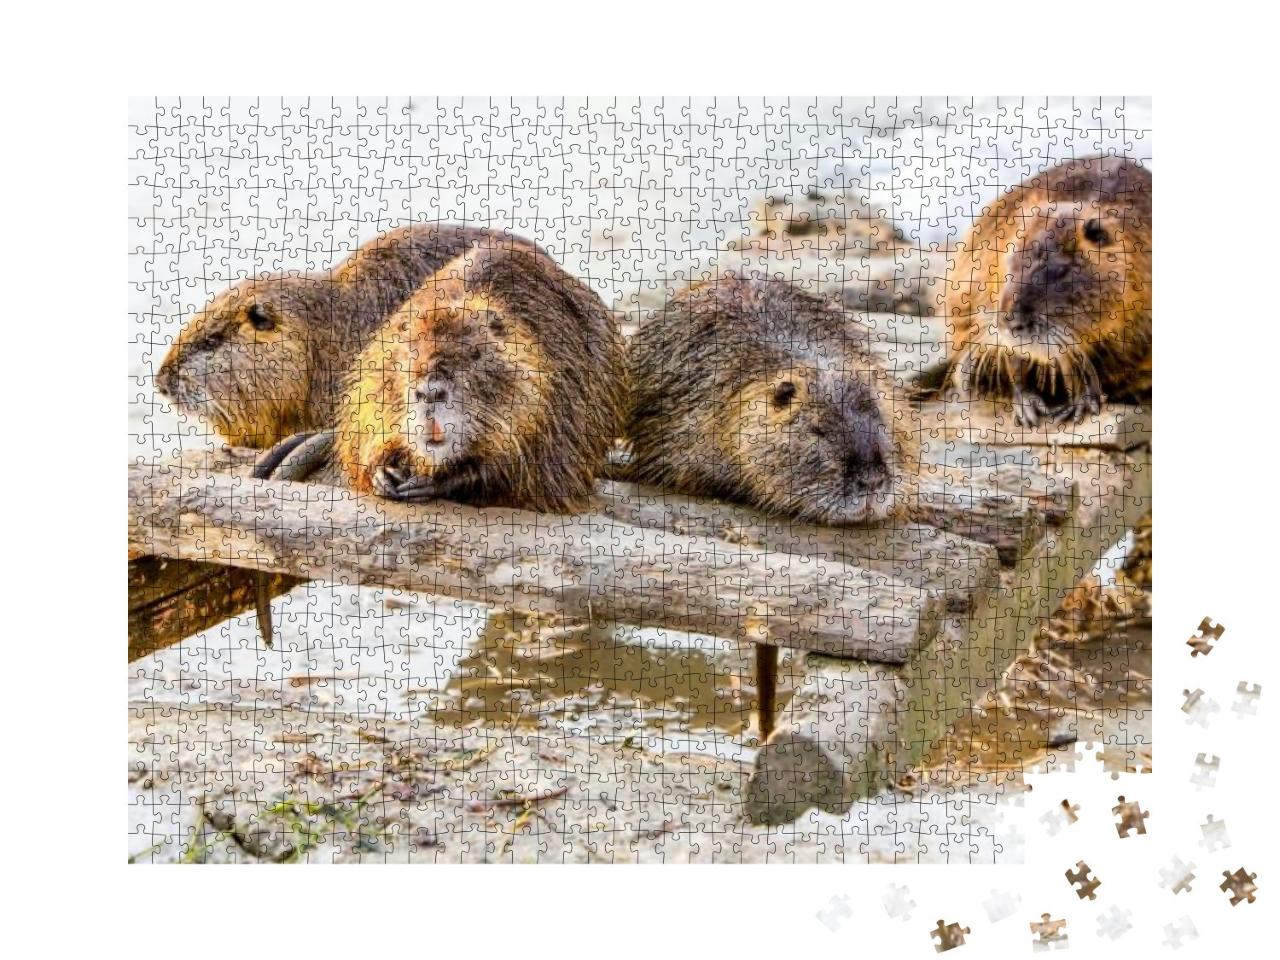 Beaver Family Group Snow Teeth Mice Four Members of a Bea... Jigsaw Puzzle with 1000 pieces